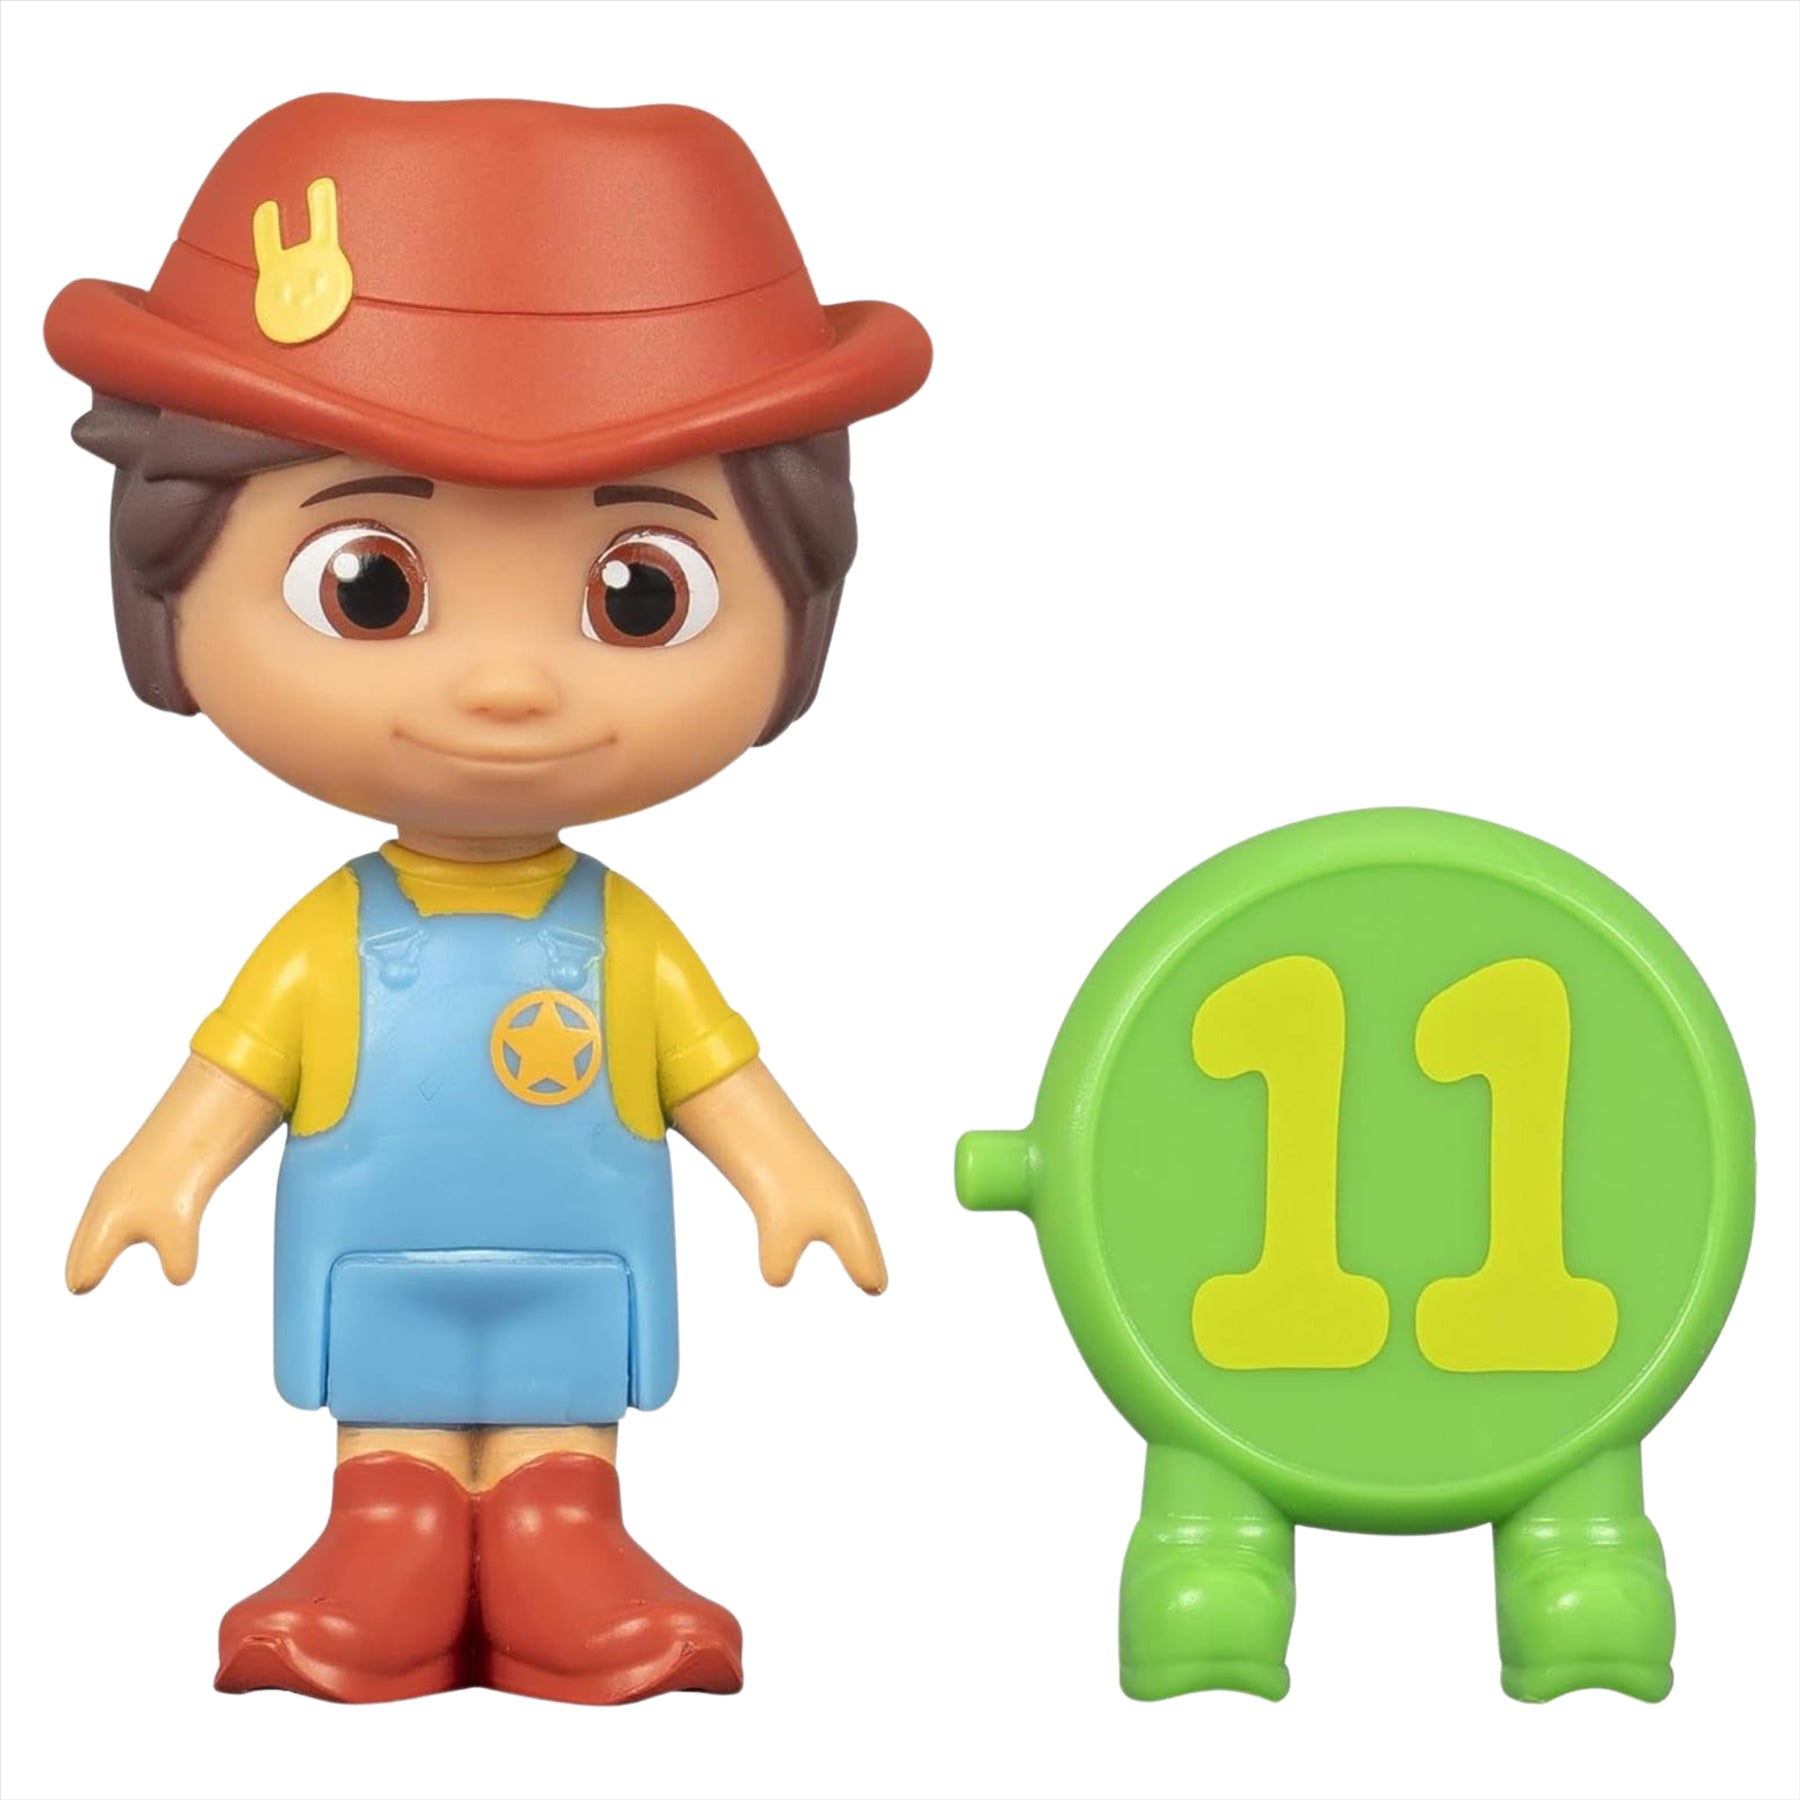 CoComelon Blind Capsule Number Character Articulated Figure Set - Puppy 20cm Plush and 3x Balls - Toptoys2u